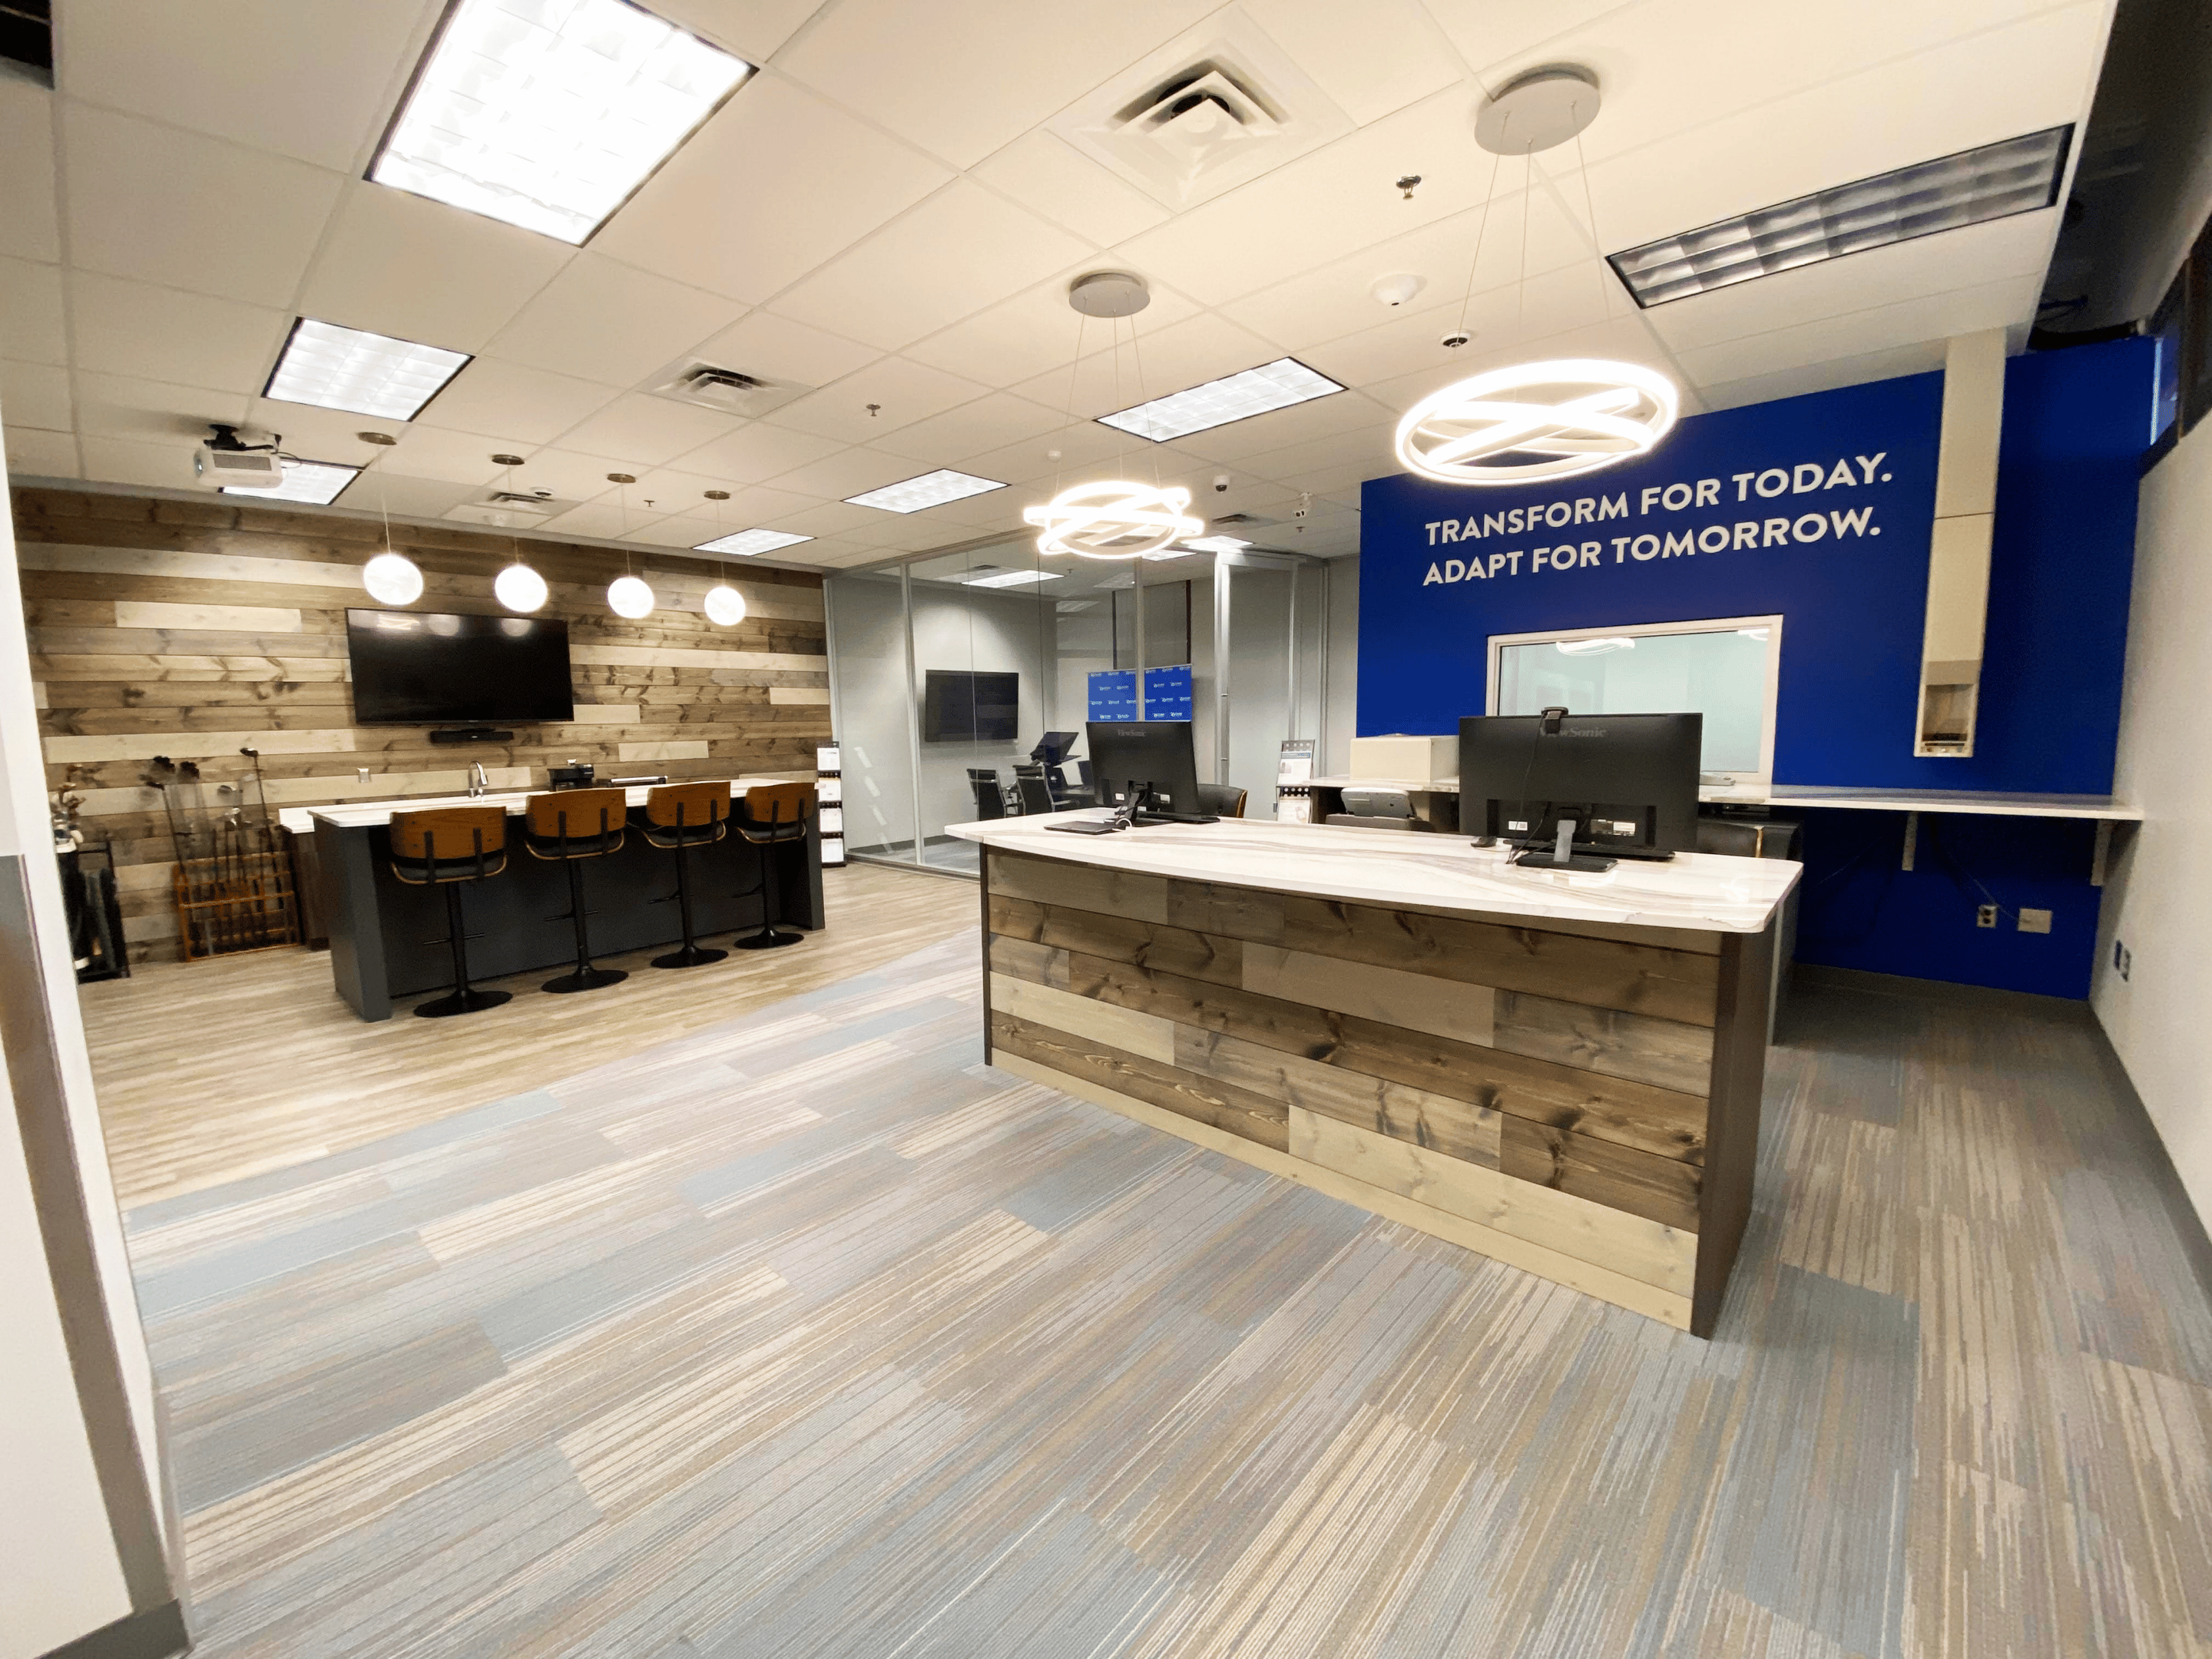 Interior shot of the Case Financial branch at an angle into the entrance. The blue wall behind reception reads, "Transform for today. Adapt for tomorrow."